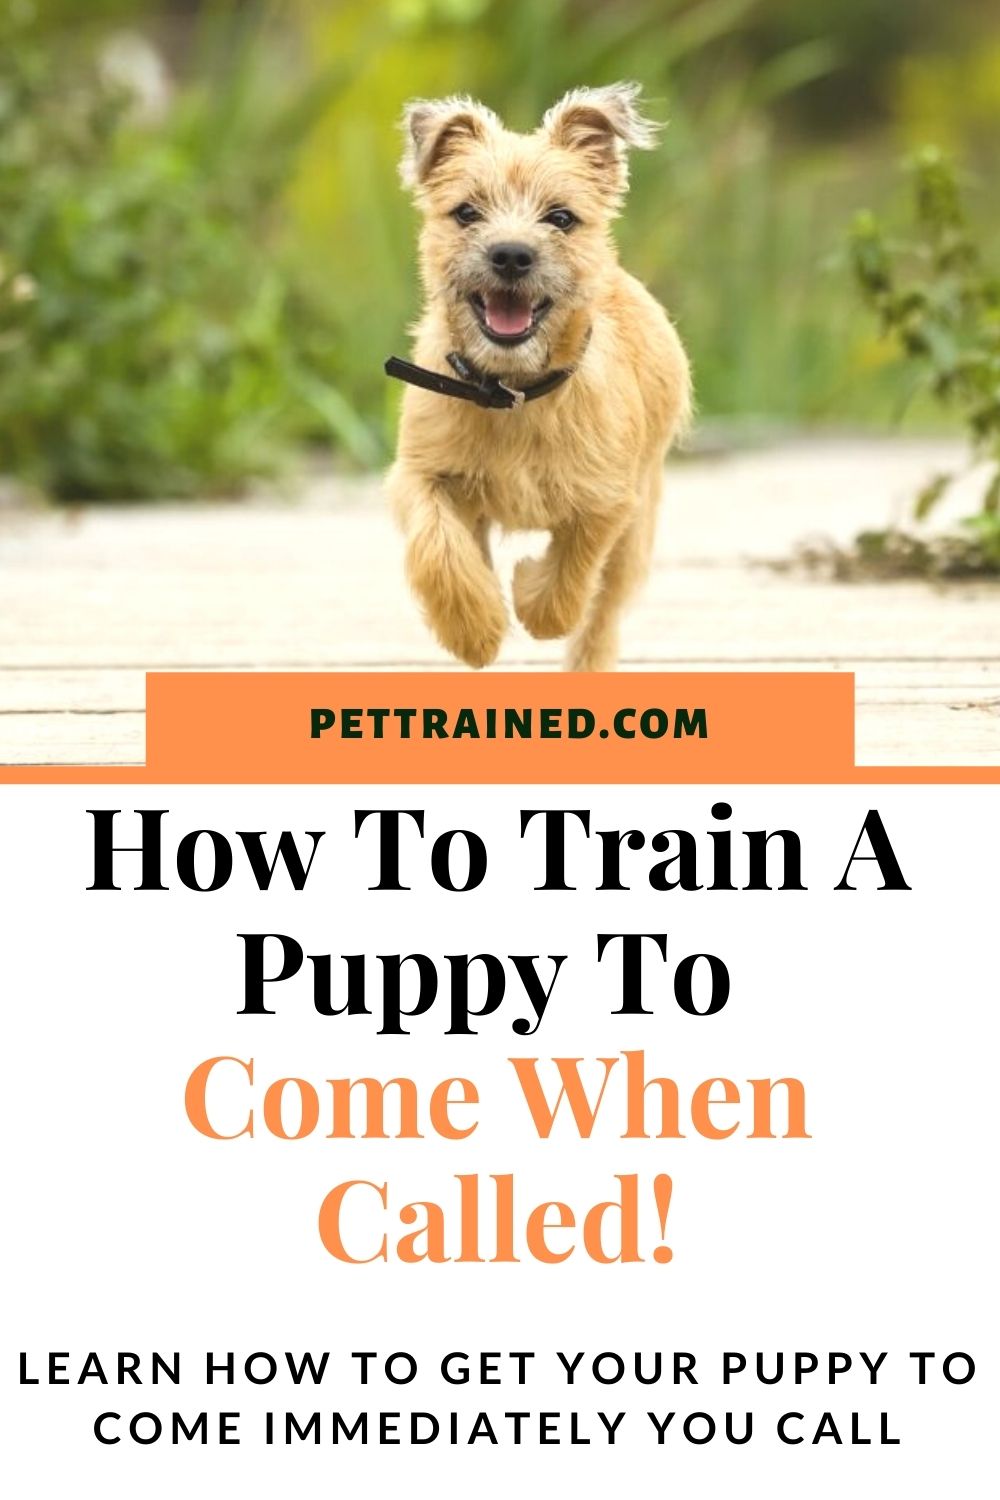 How to Train a Puppy to Come When Called Tips